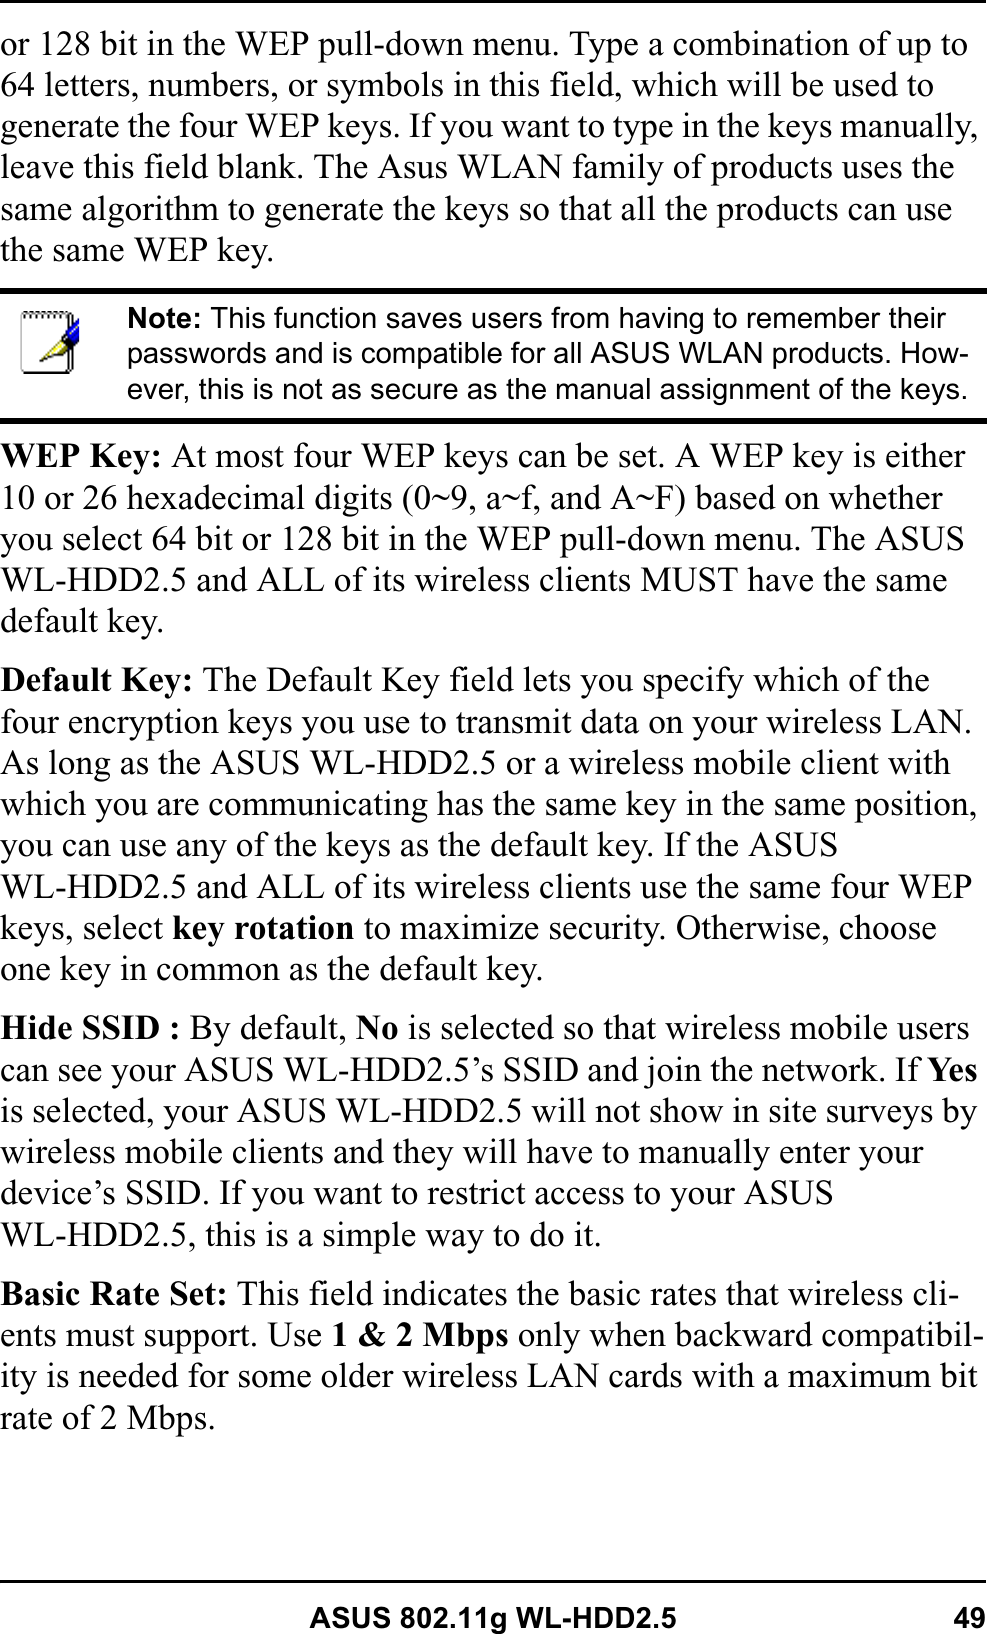 ASUS 802.11g WL-HDD2.5 49or 128 bit in the WEP pull-down menu. Type a combination of up to 64 letters, numbers, or symbols in this field, which will be used to generate the four WEP keys. If you want to type in the keys manually, leave this field blank. The Asus WLAN family of products uses the same algorithm to generate the keys so that all the products can use the same WEP key.WEP Key: At most four WEP keys can be set. A WEP key is either 10 or 26 hexadecimal digits (0~9, a~f, and A~F) based on whether you select 64 bit or 128 bit in the WEP pull-down menu. The ASUS WL-HDD2.5 and ALL of its wireless clients MUST have the same default key.Default Key: The Default Key field lets you specify which of the four encryption keys you use to transmit data on your wireless LAN. As long as the ASUS WL-HDD2.5 or a wireless mobile client with which you are communicating has the same key in the same position, you can use any of the keys as the default key. If the ASUS WL-HDD2.5 and ALL of its wireless clients use the same four WEP keys, select key rotation to maximize security. Otherwise, choose one key in common as the default key.Hide SSID : By default, No is selected so that wireless mobile users can see your ASUS WL-HDD2.5’s SSID and join the network. If Ye sis selected, your ASUS WL-HDD2.5 will not show in site surveys by wireless mobile clients and they will have to manually enter your device’s SSID. If you want to restrict access to your ASUS WL-HDD2.5, this is a simple way to do it.Basic Rate Set: This field indicates the basic rates that wireless cli-ents must support. Use 1 &amp; 2 Mbps only when backward compatibil-ity is needed for some older wireless LAN cards with a maximum bit rate of 2 Mbps.Note: This function saves users from having to remember their passwords and is compatible for all ASUS WLAN products. How-ever, this is not as secure as the manual assignment of the keys.